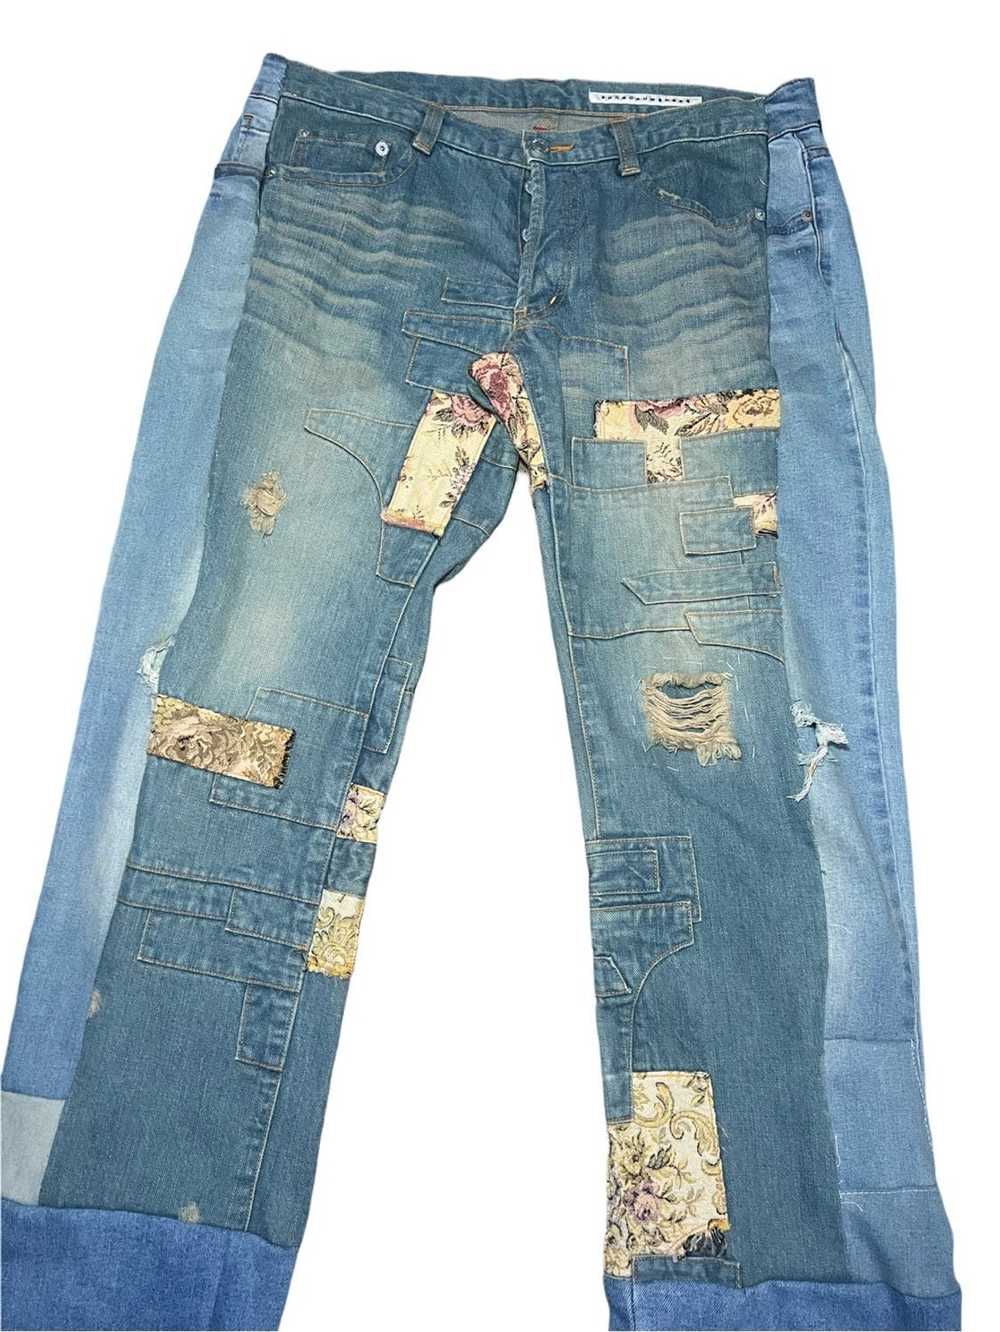 Issey Miyake Floral Patchwork Jeans - image 3